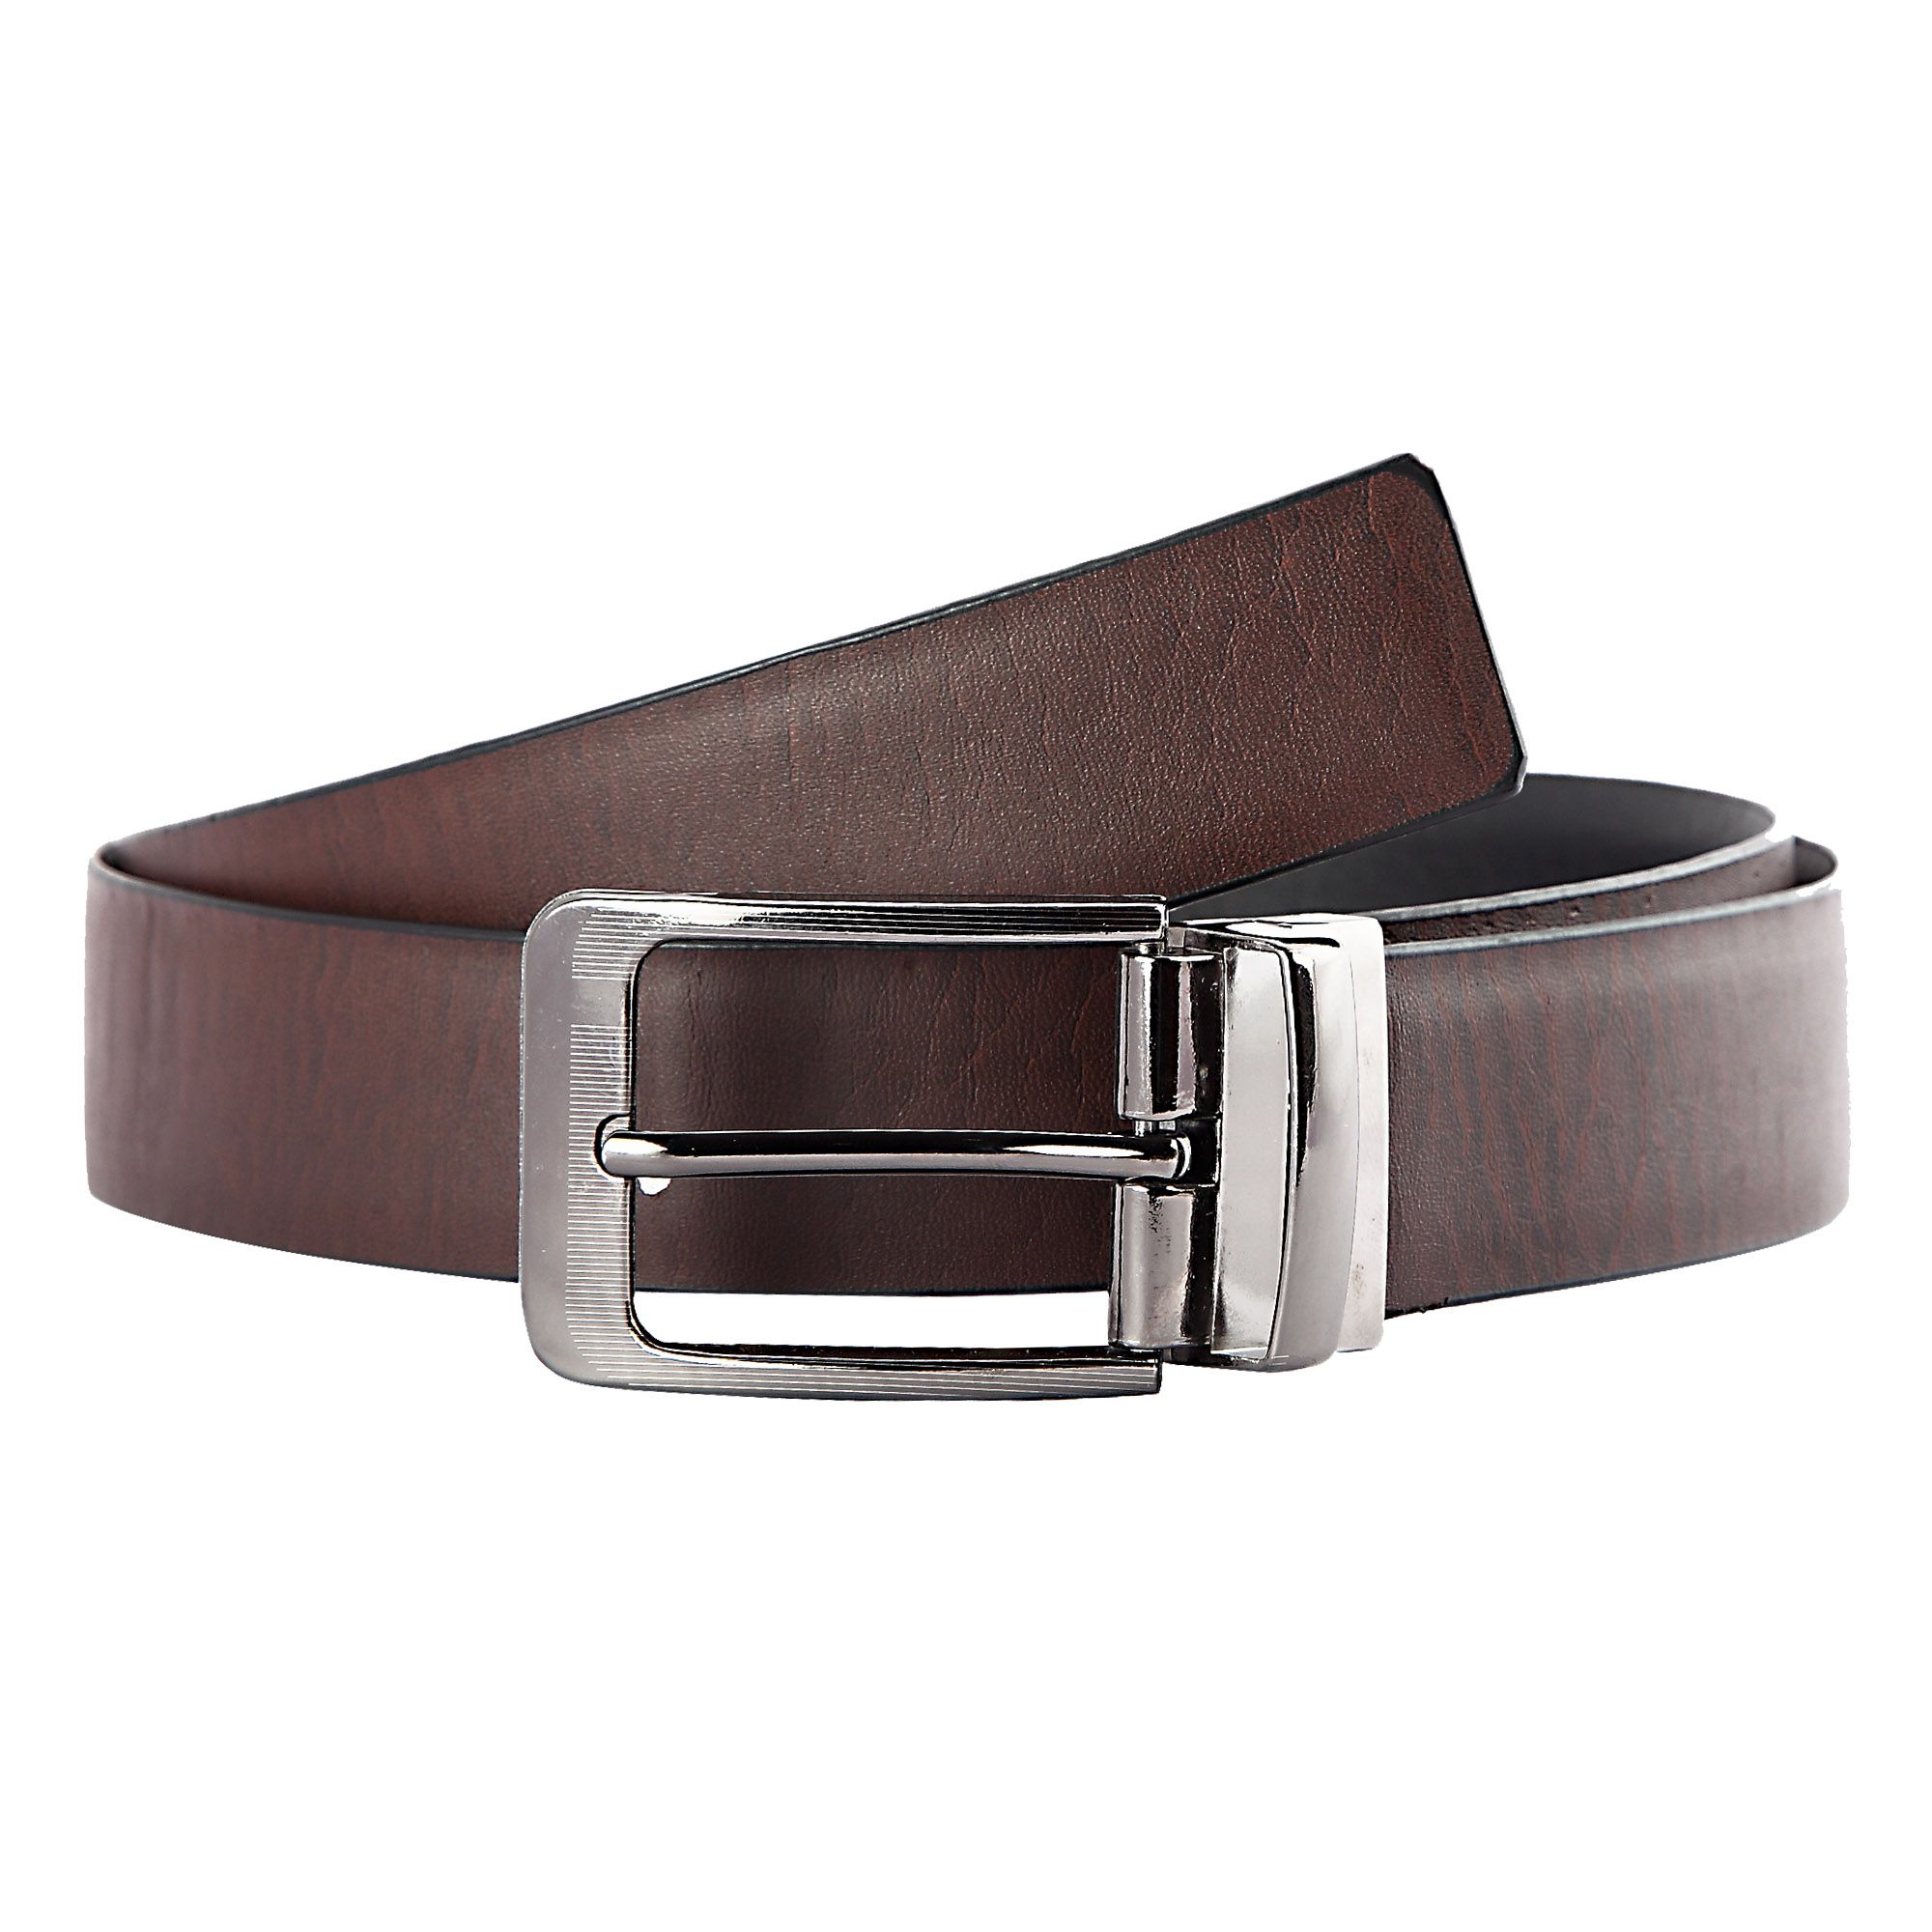 Adam Land Brown Leather Formal Belts: Buy Online at Low Price in India ...